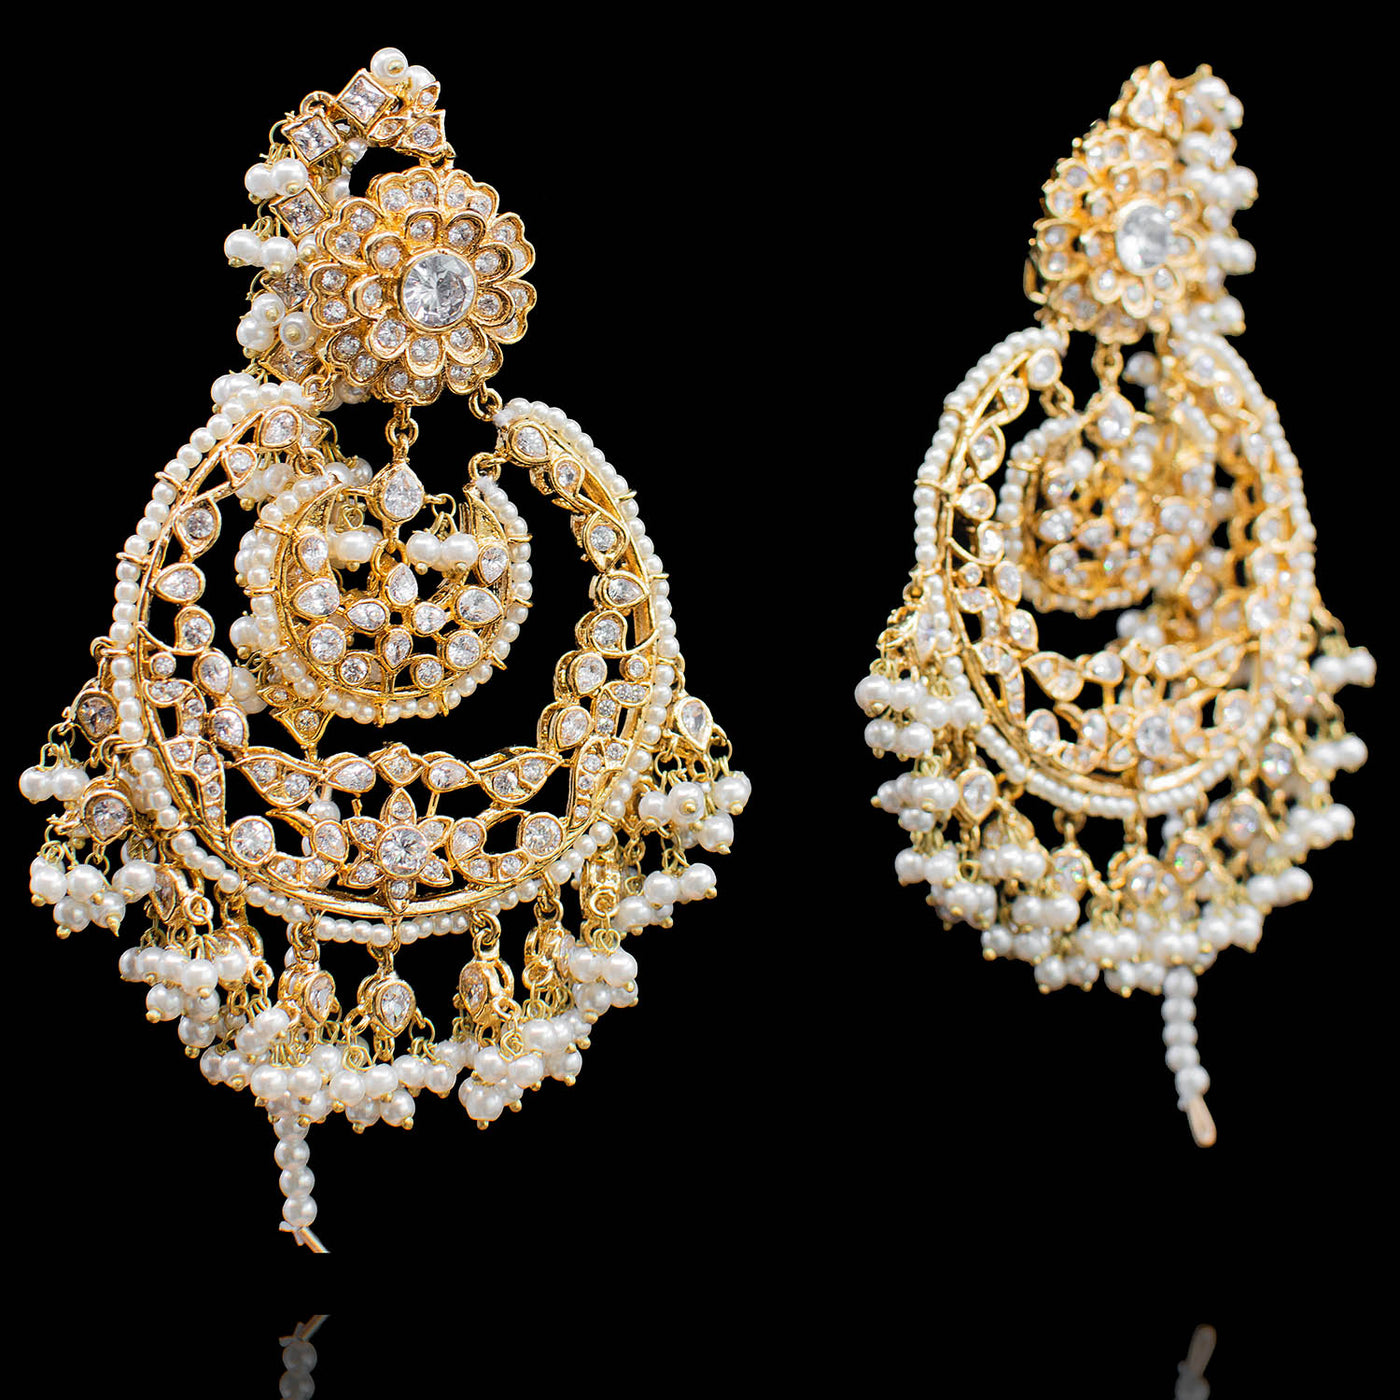 Laleen Earrings - Available in 2 Options